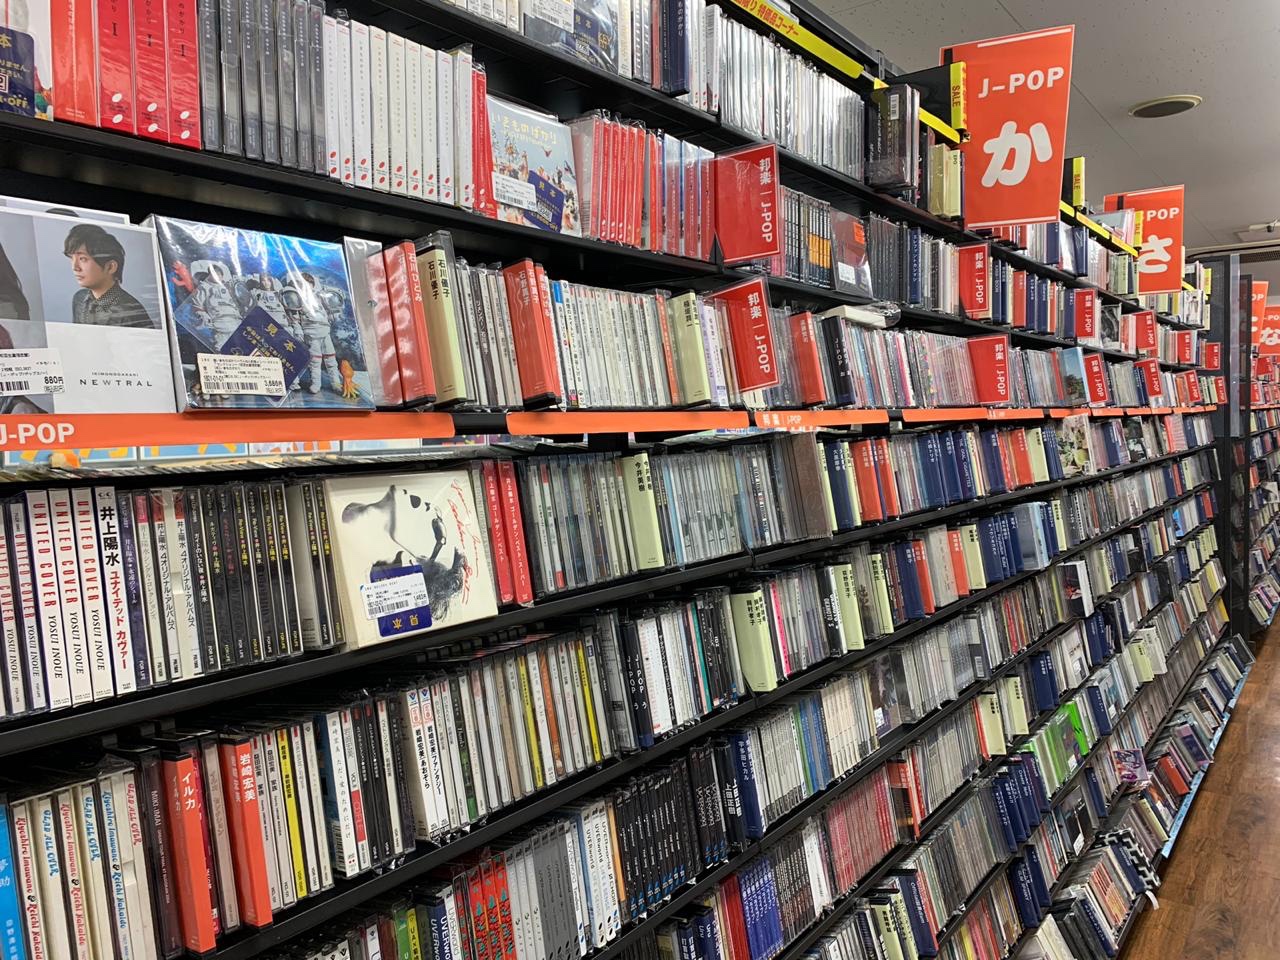 J-Pop Collection of CDs